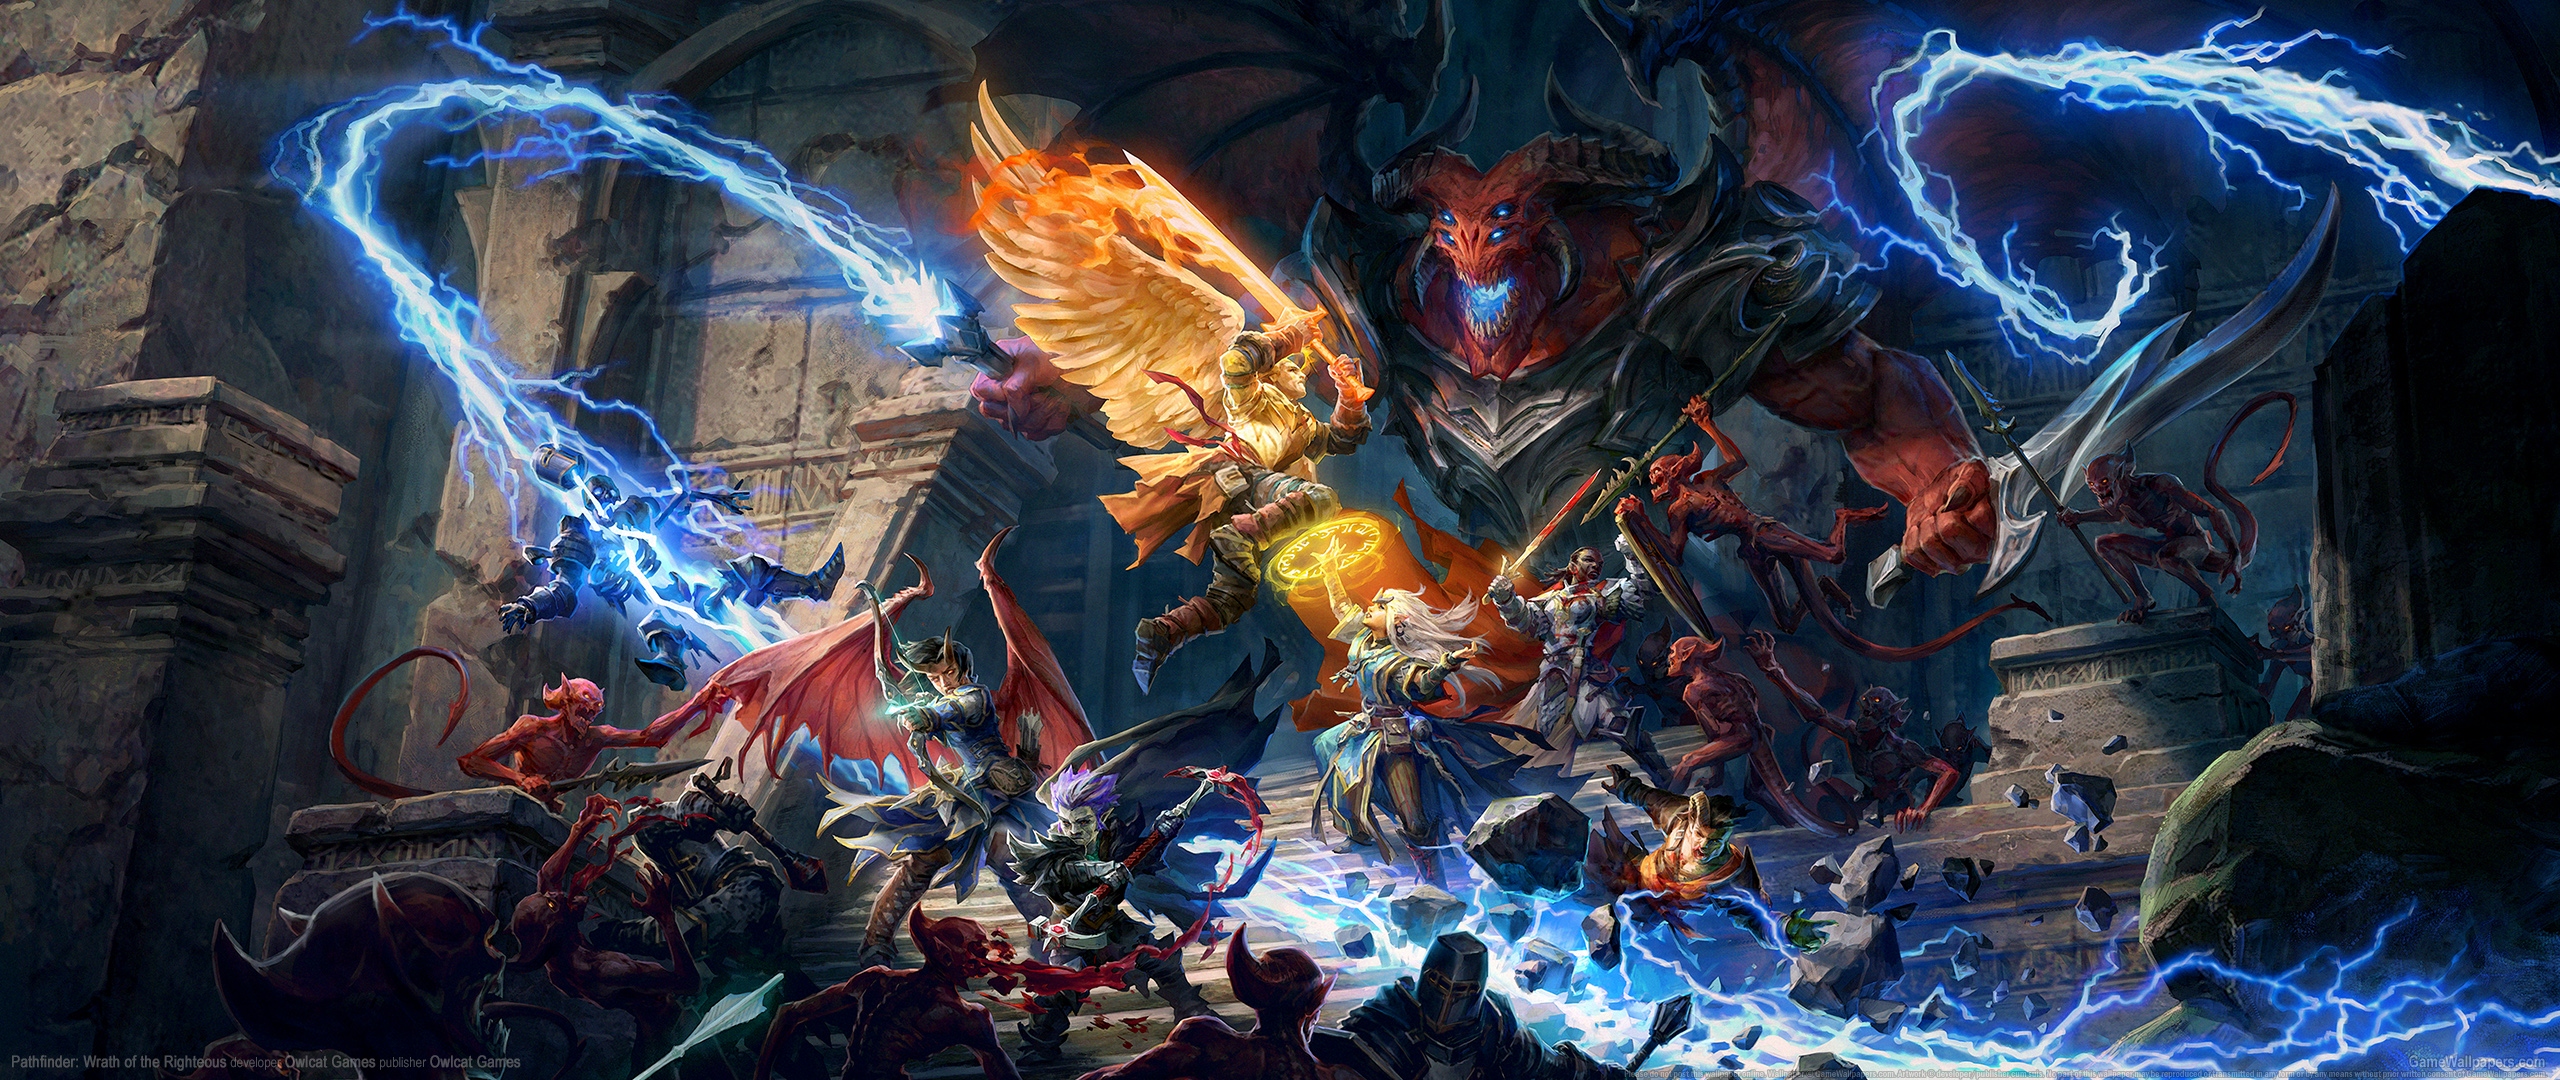 Pathfinder: Wrath of the Righteous 2560x1080 wallpaper or background 01